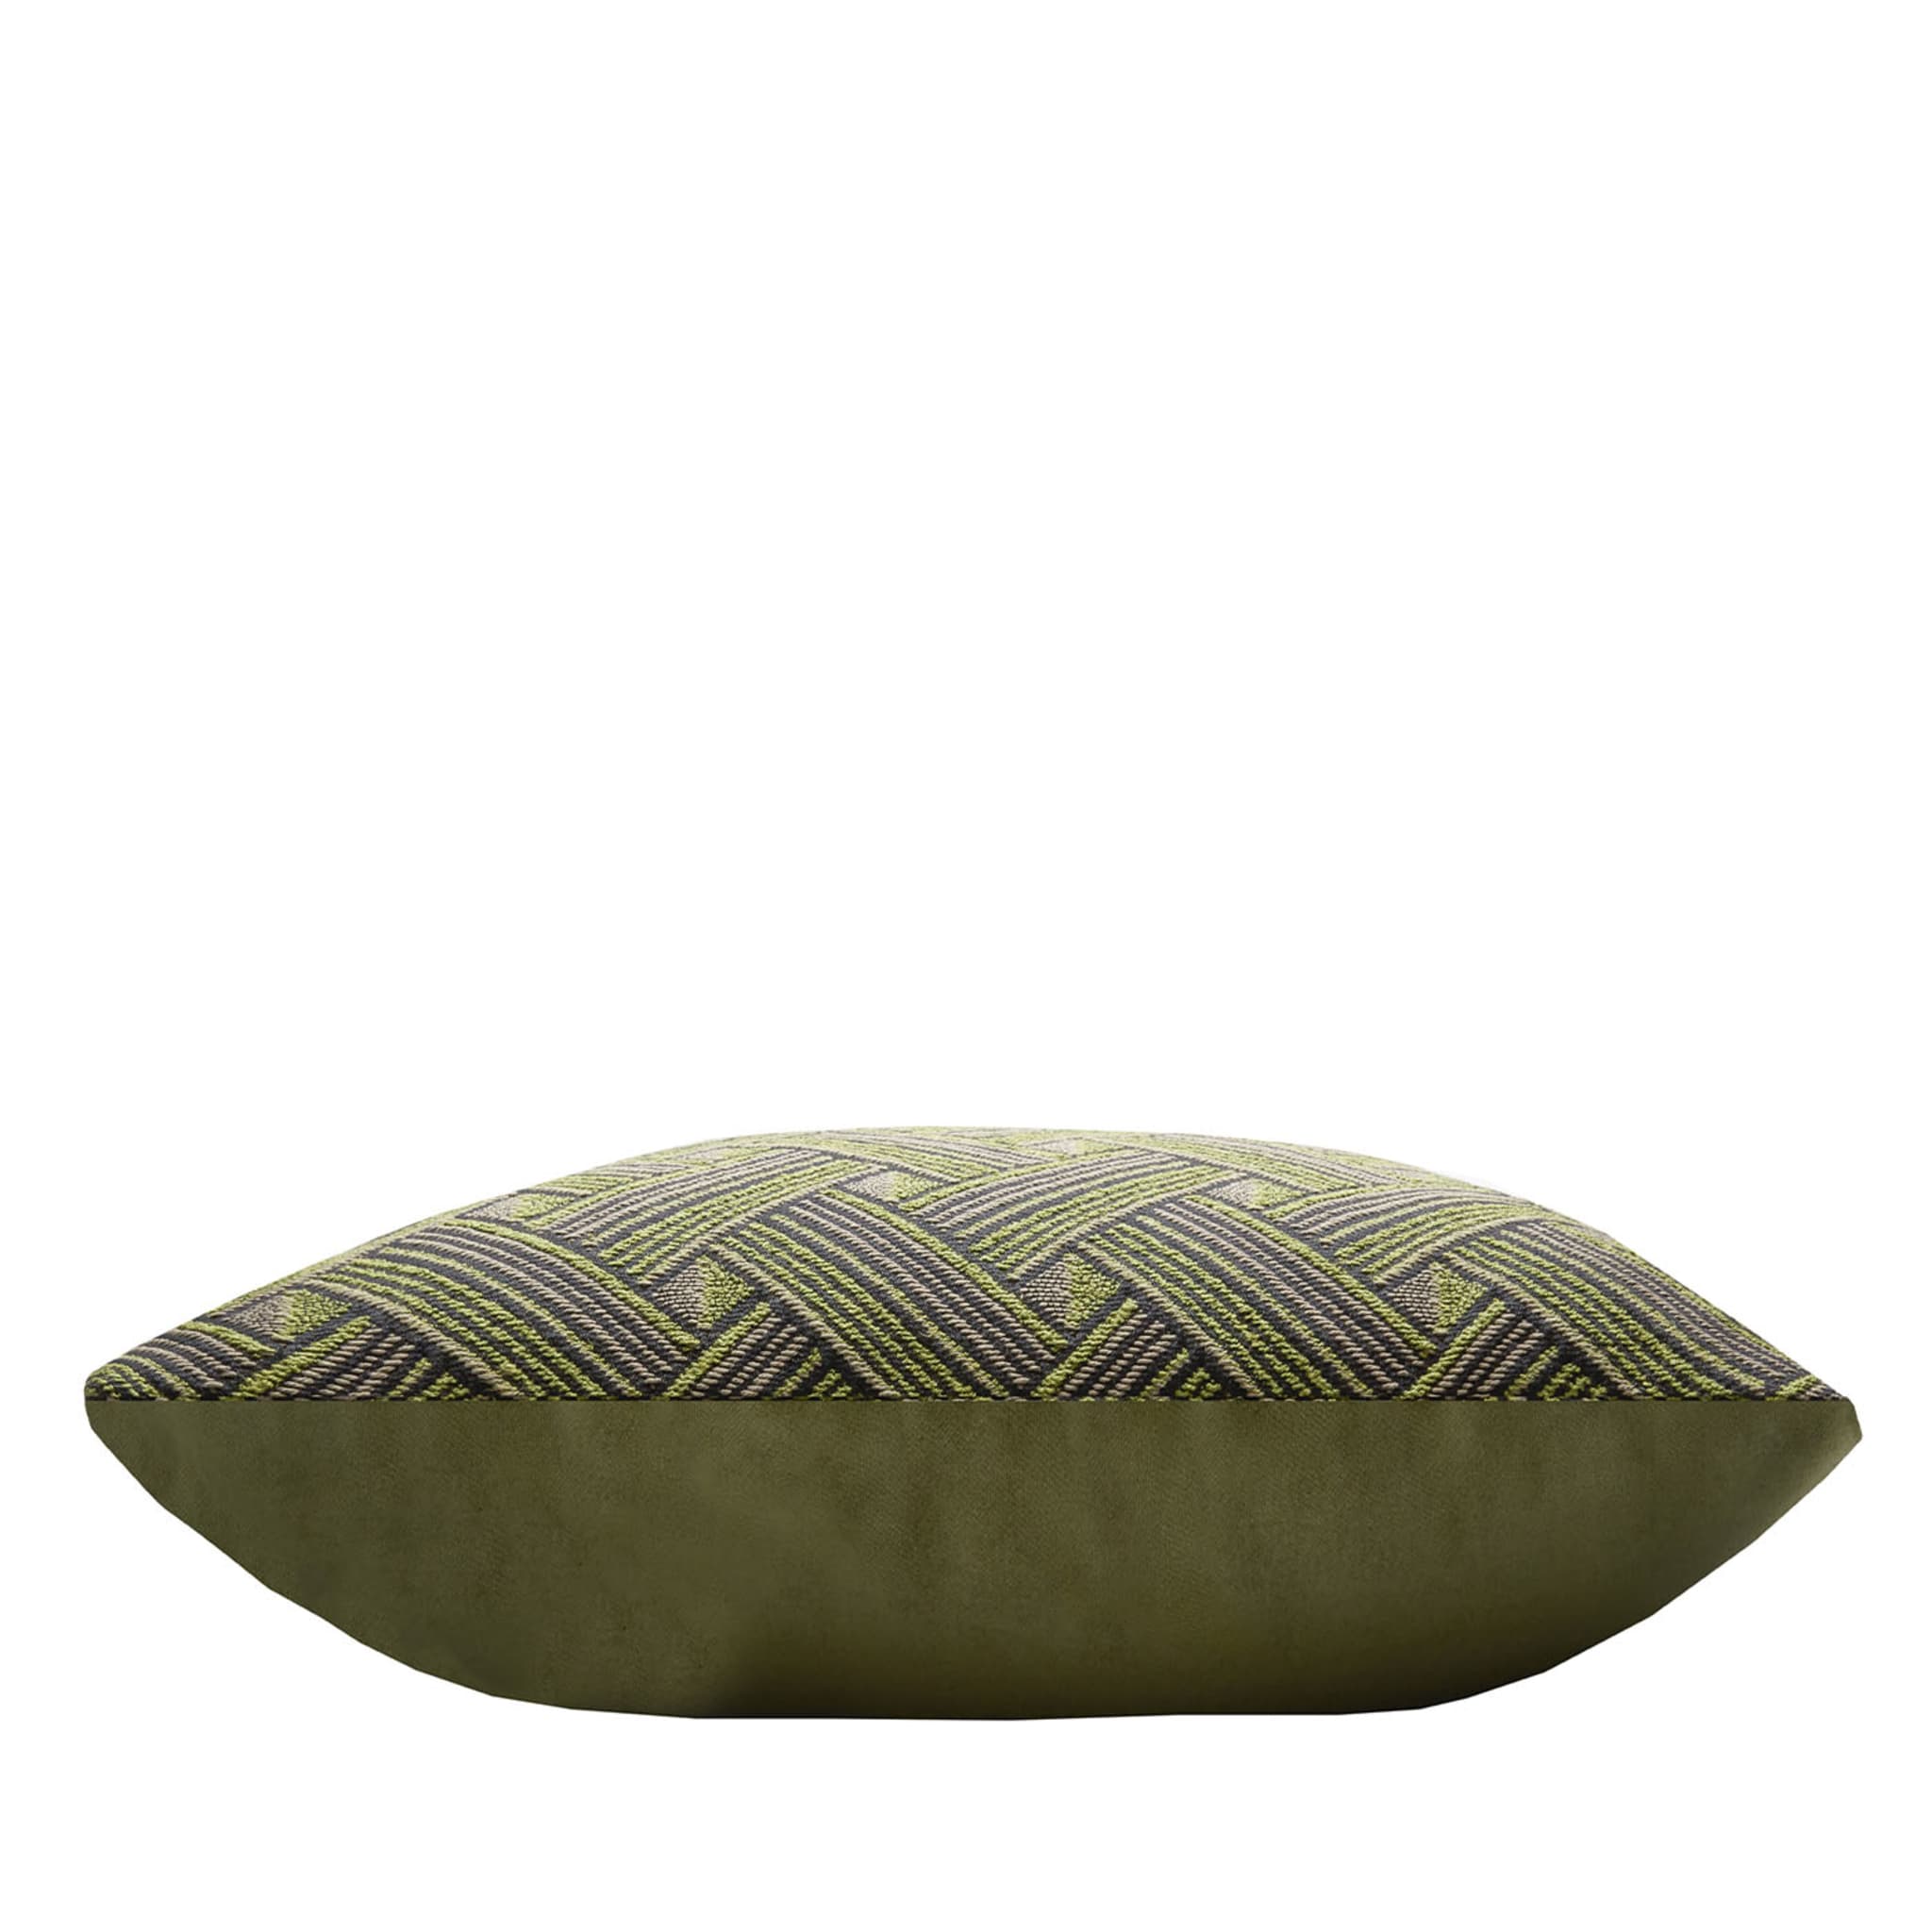 Rock Collection Green Cushion - Alternative view 1